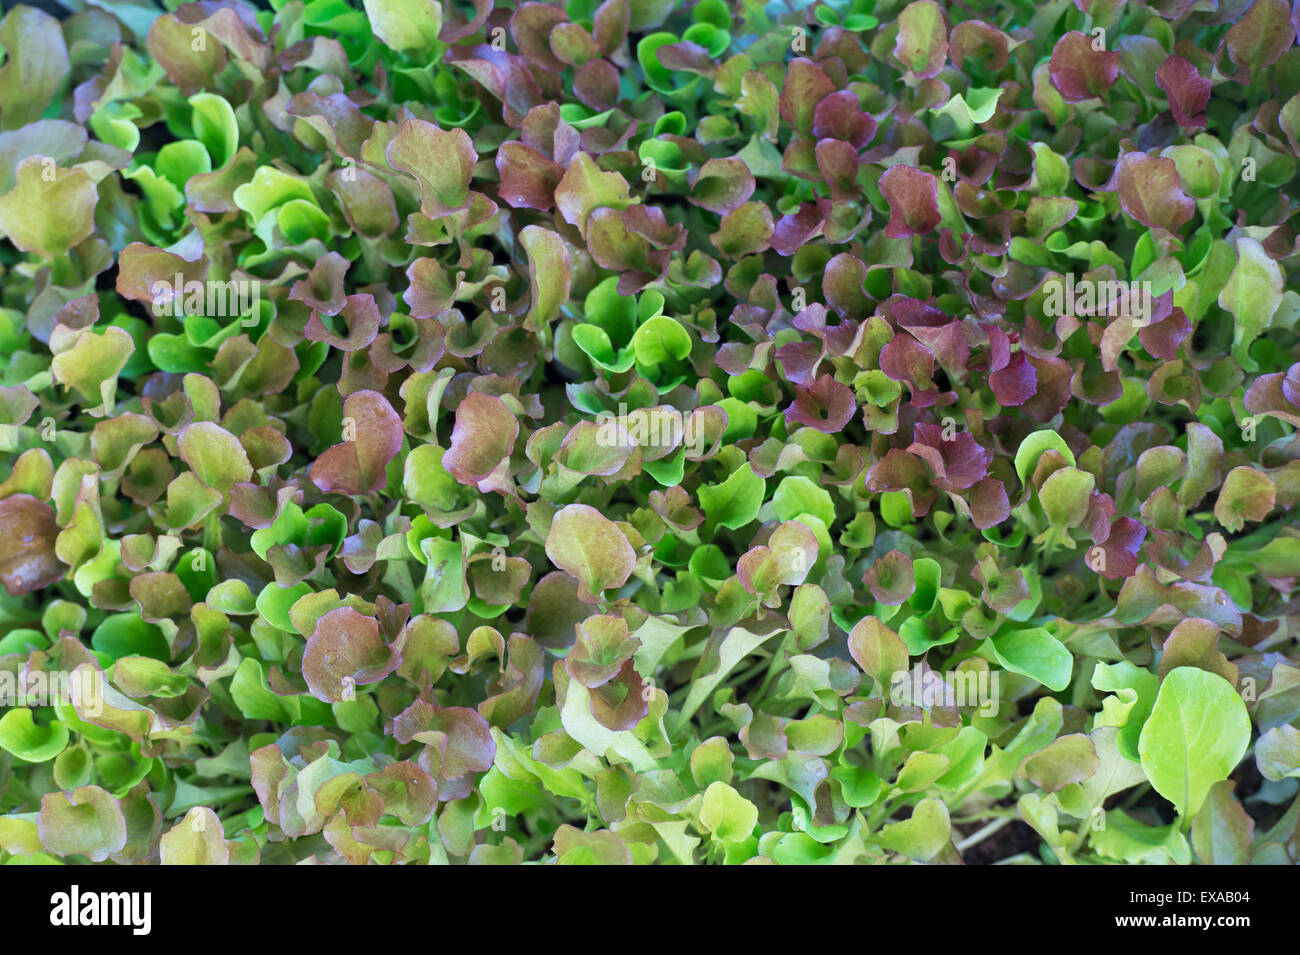 Mixed salad leaves growing in a vegetable garden Stock Photo